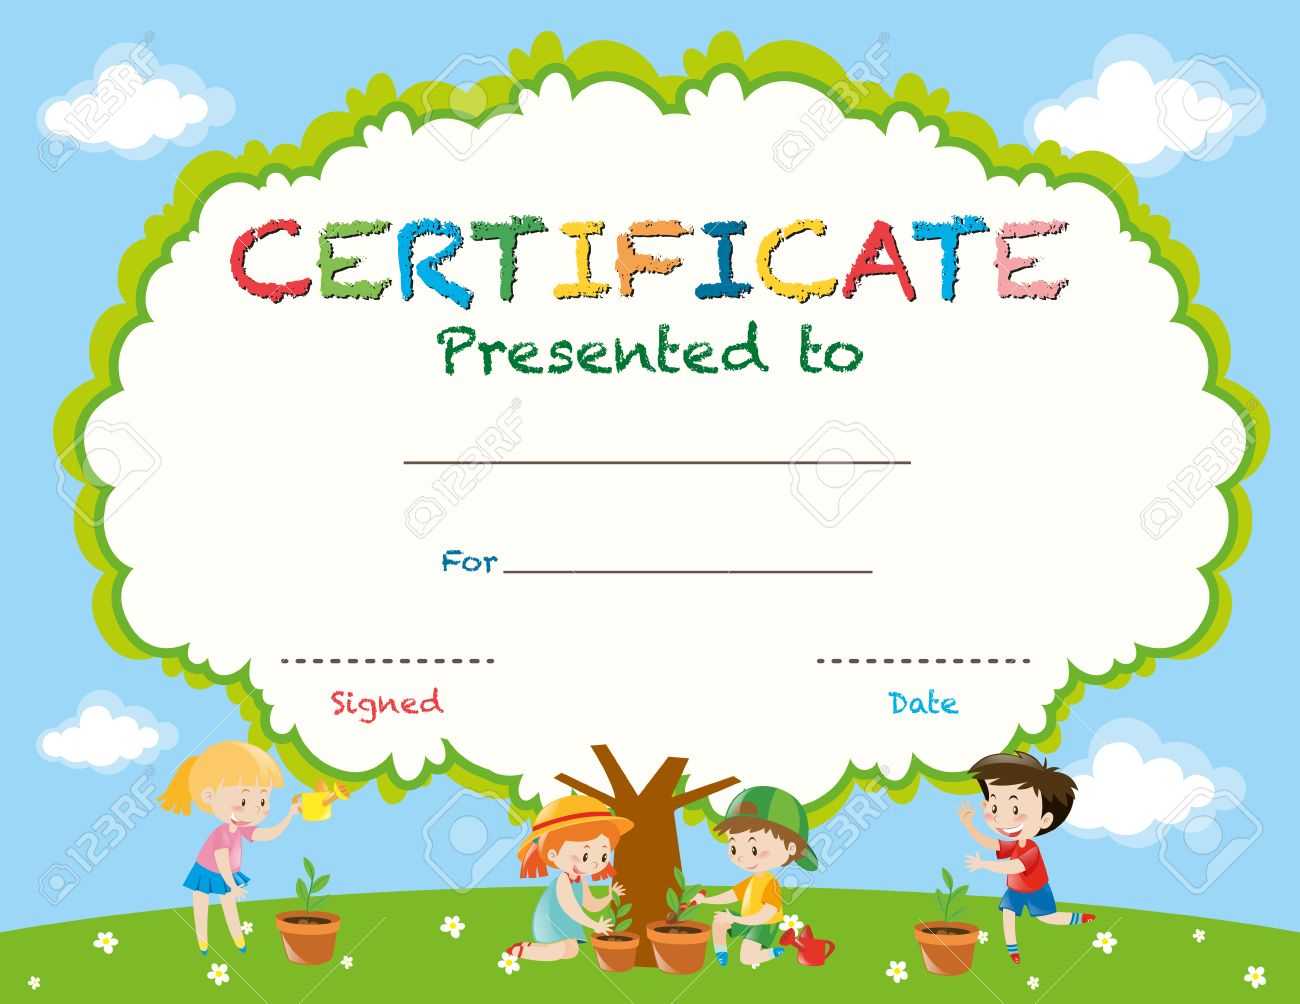 Swimming Certificate Templates Free ] – Certificate Template Throughout Free Printable Certificate Templates For Kids